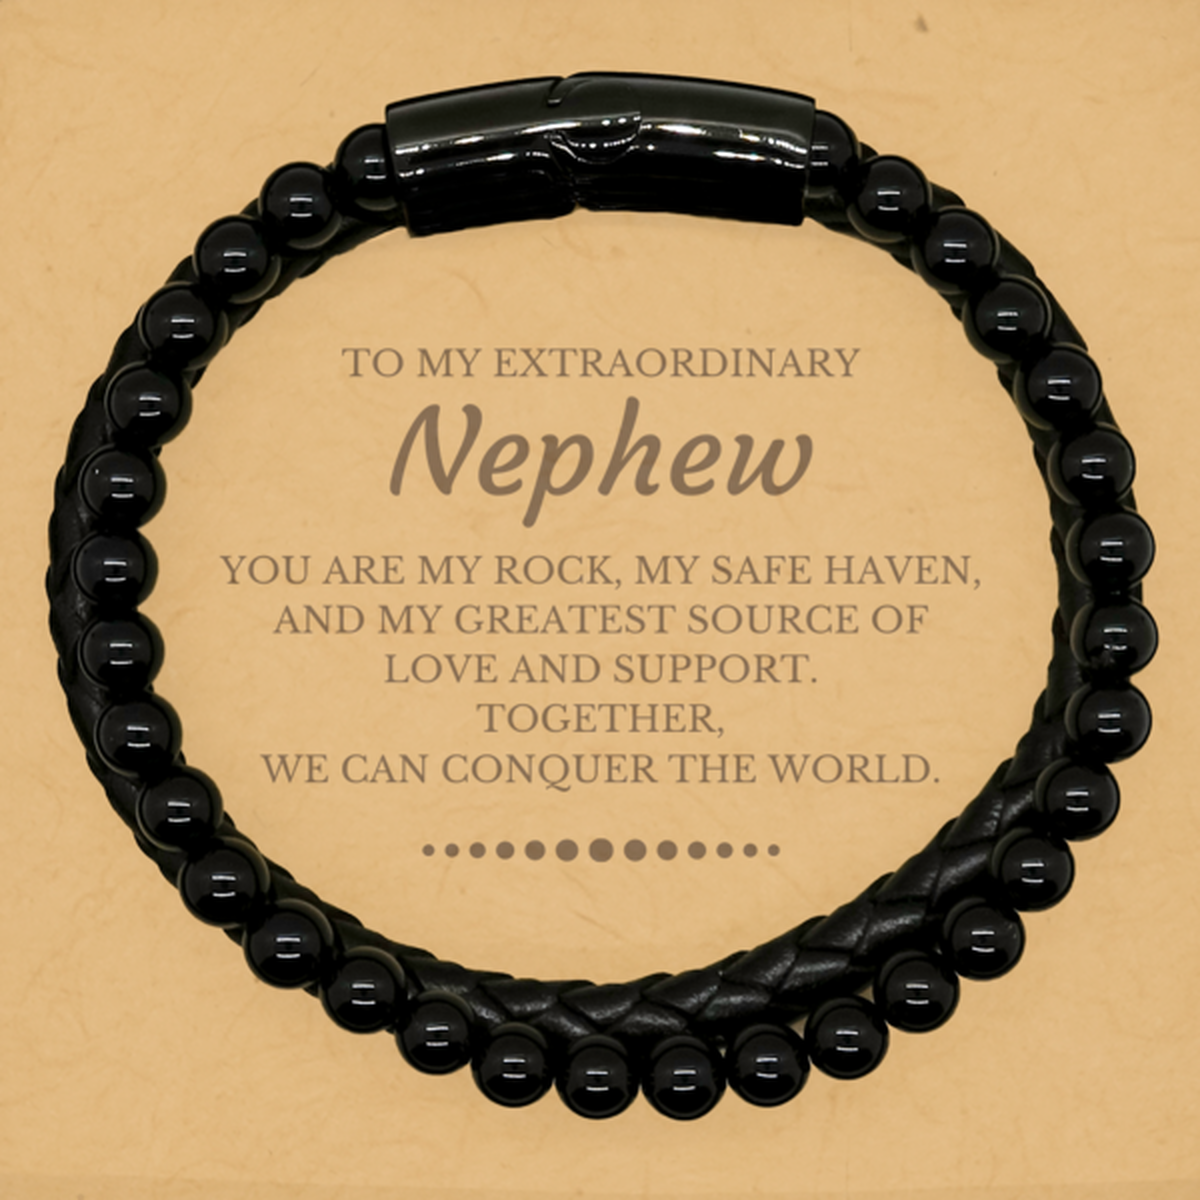 To My Extraordinary Nephew Gifts, Together, we can conquer the world, Birthday Stone Leather Bracelets For Nephew, Christmas Gifts For Nephew